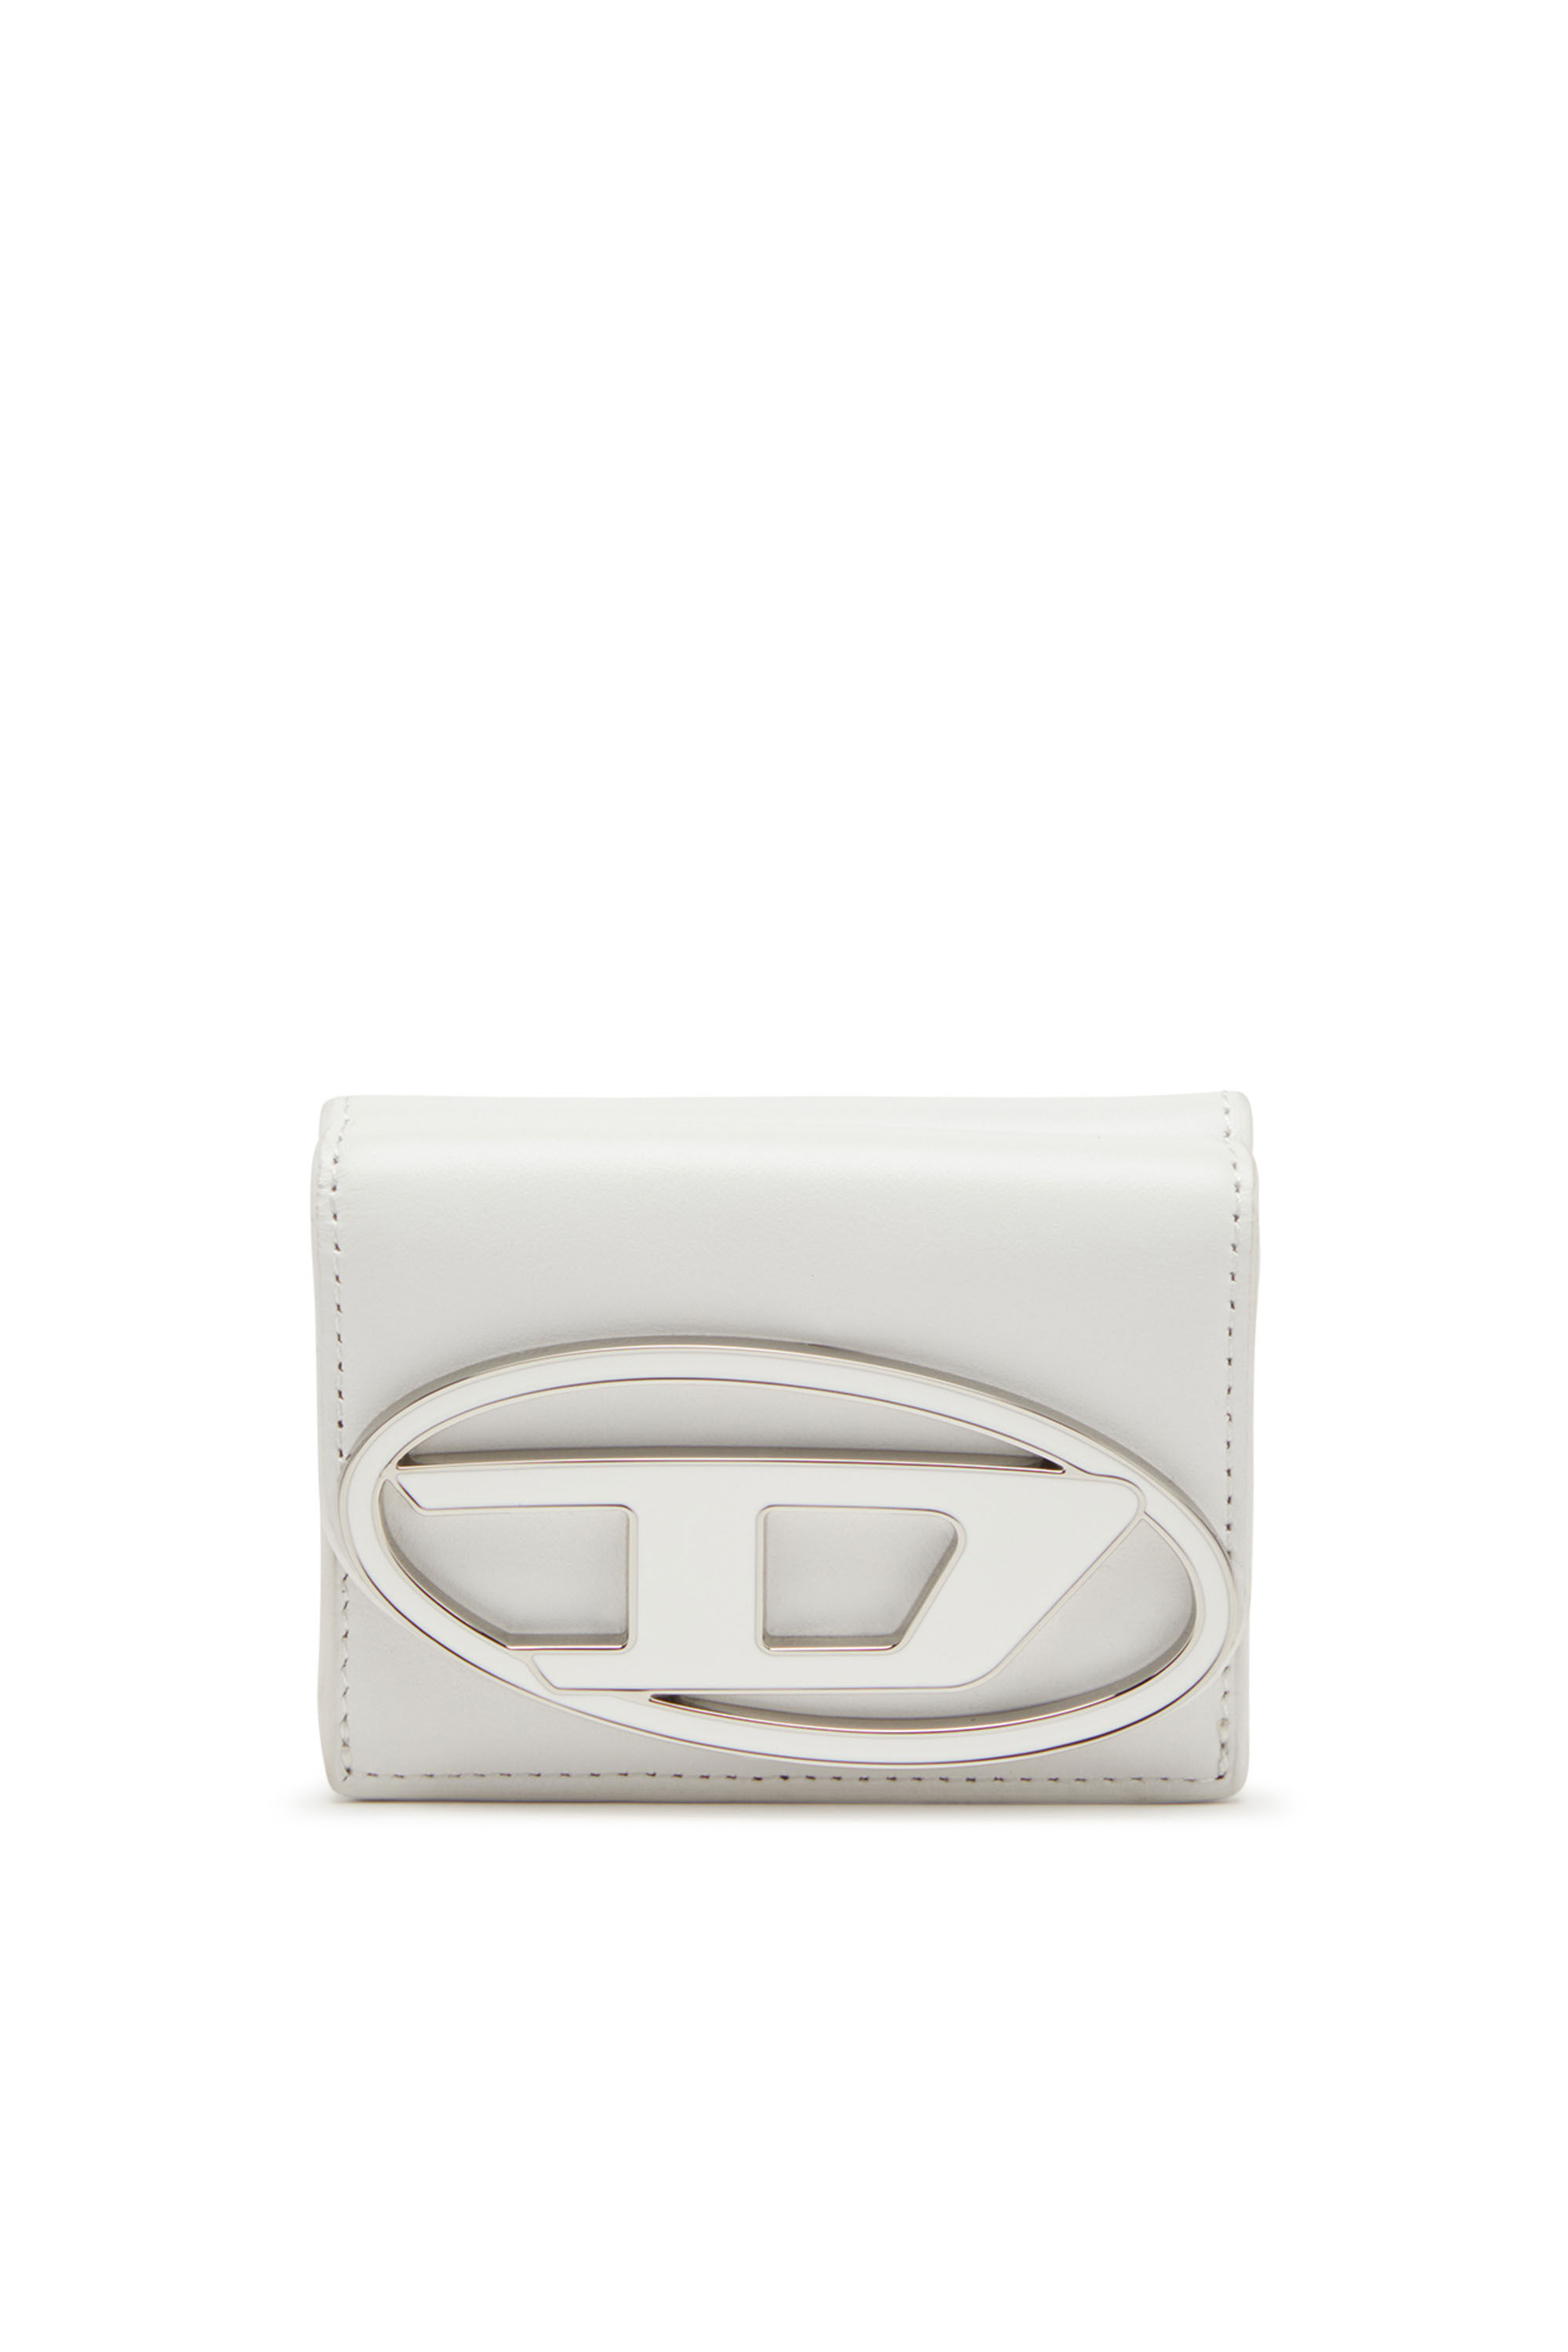 Diesel - 1DR TRI FOLD COIN XS II, Female Tri-fold wallet in leather in ホワイト - Image 1